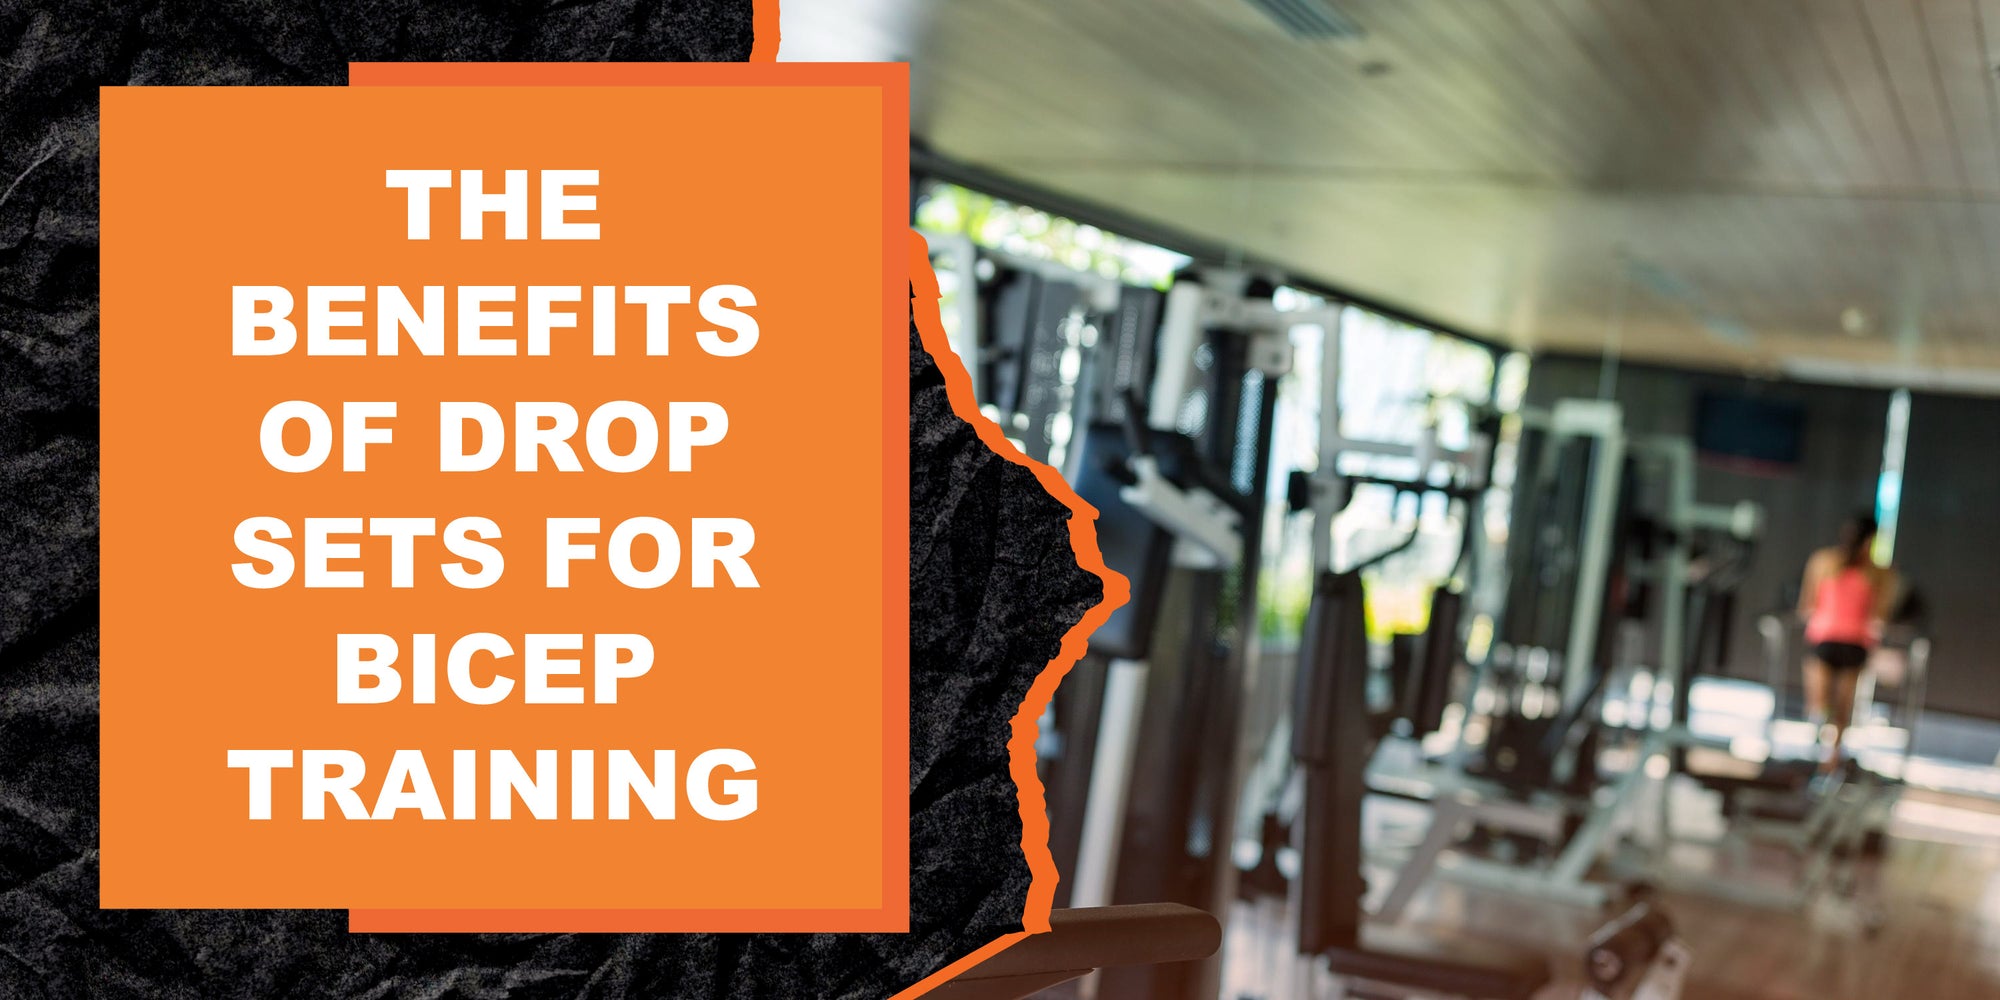 The Benefits of Drop Sets for Bicep Training